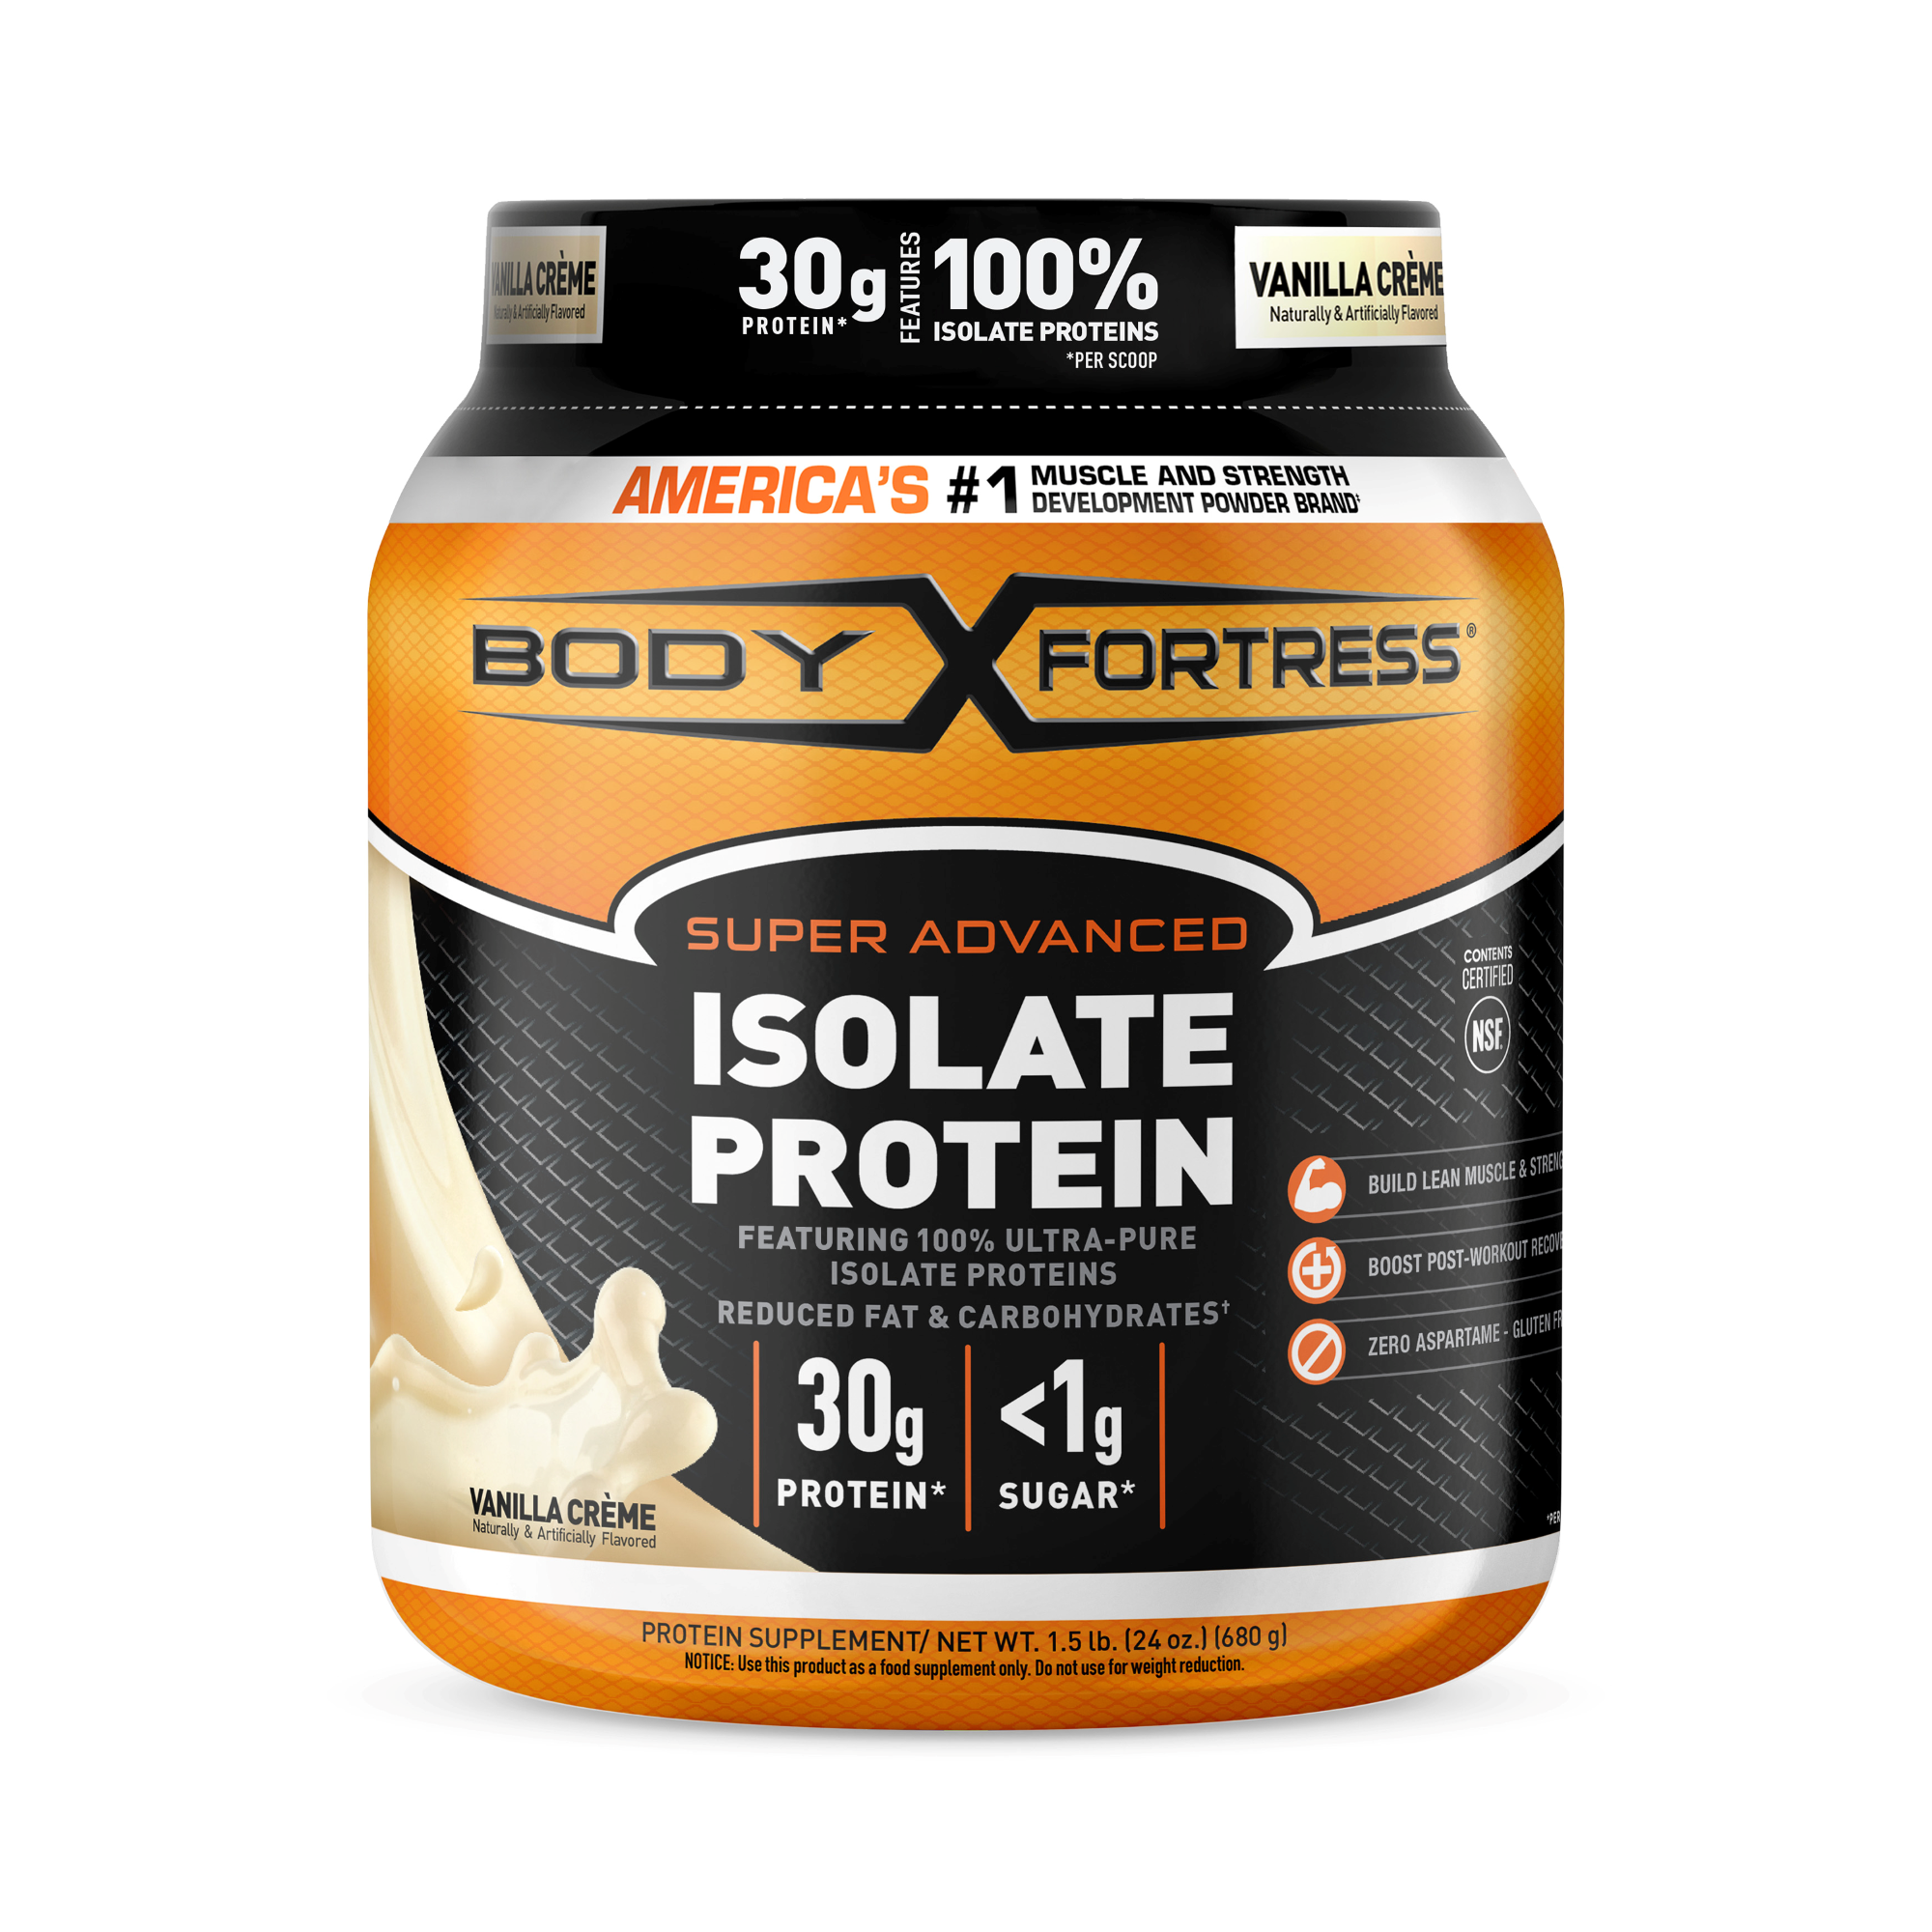 Body Fortress Isolate Powder, 30g Protein per scoop, Vanilla, 1.5 lbs (Packaging May Vary) - image 1 of 6